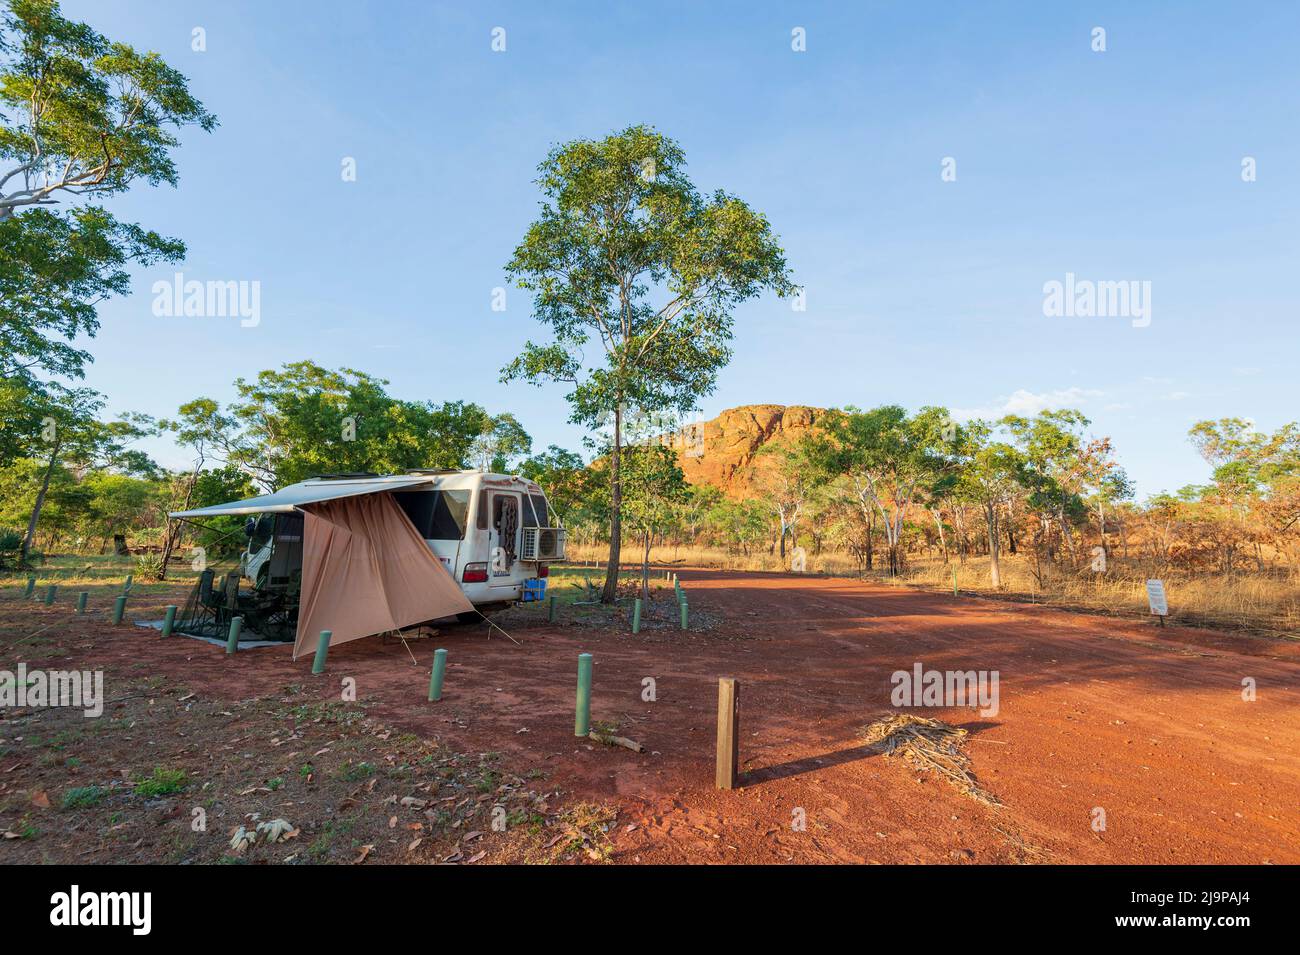 Motorhome bushcamping in Keep River National Park, a popular tourist destination, Northern Territory, NT, Australia Stock Photo